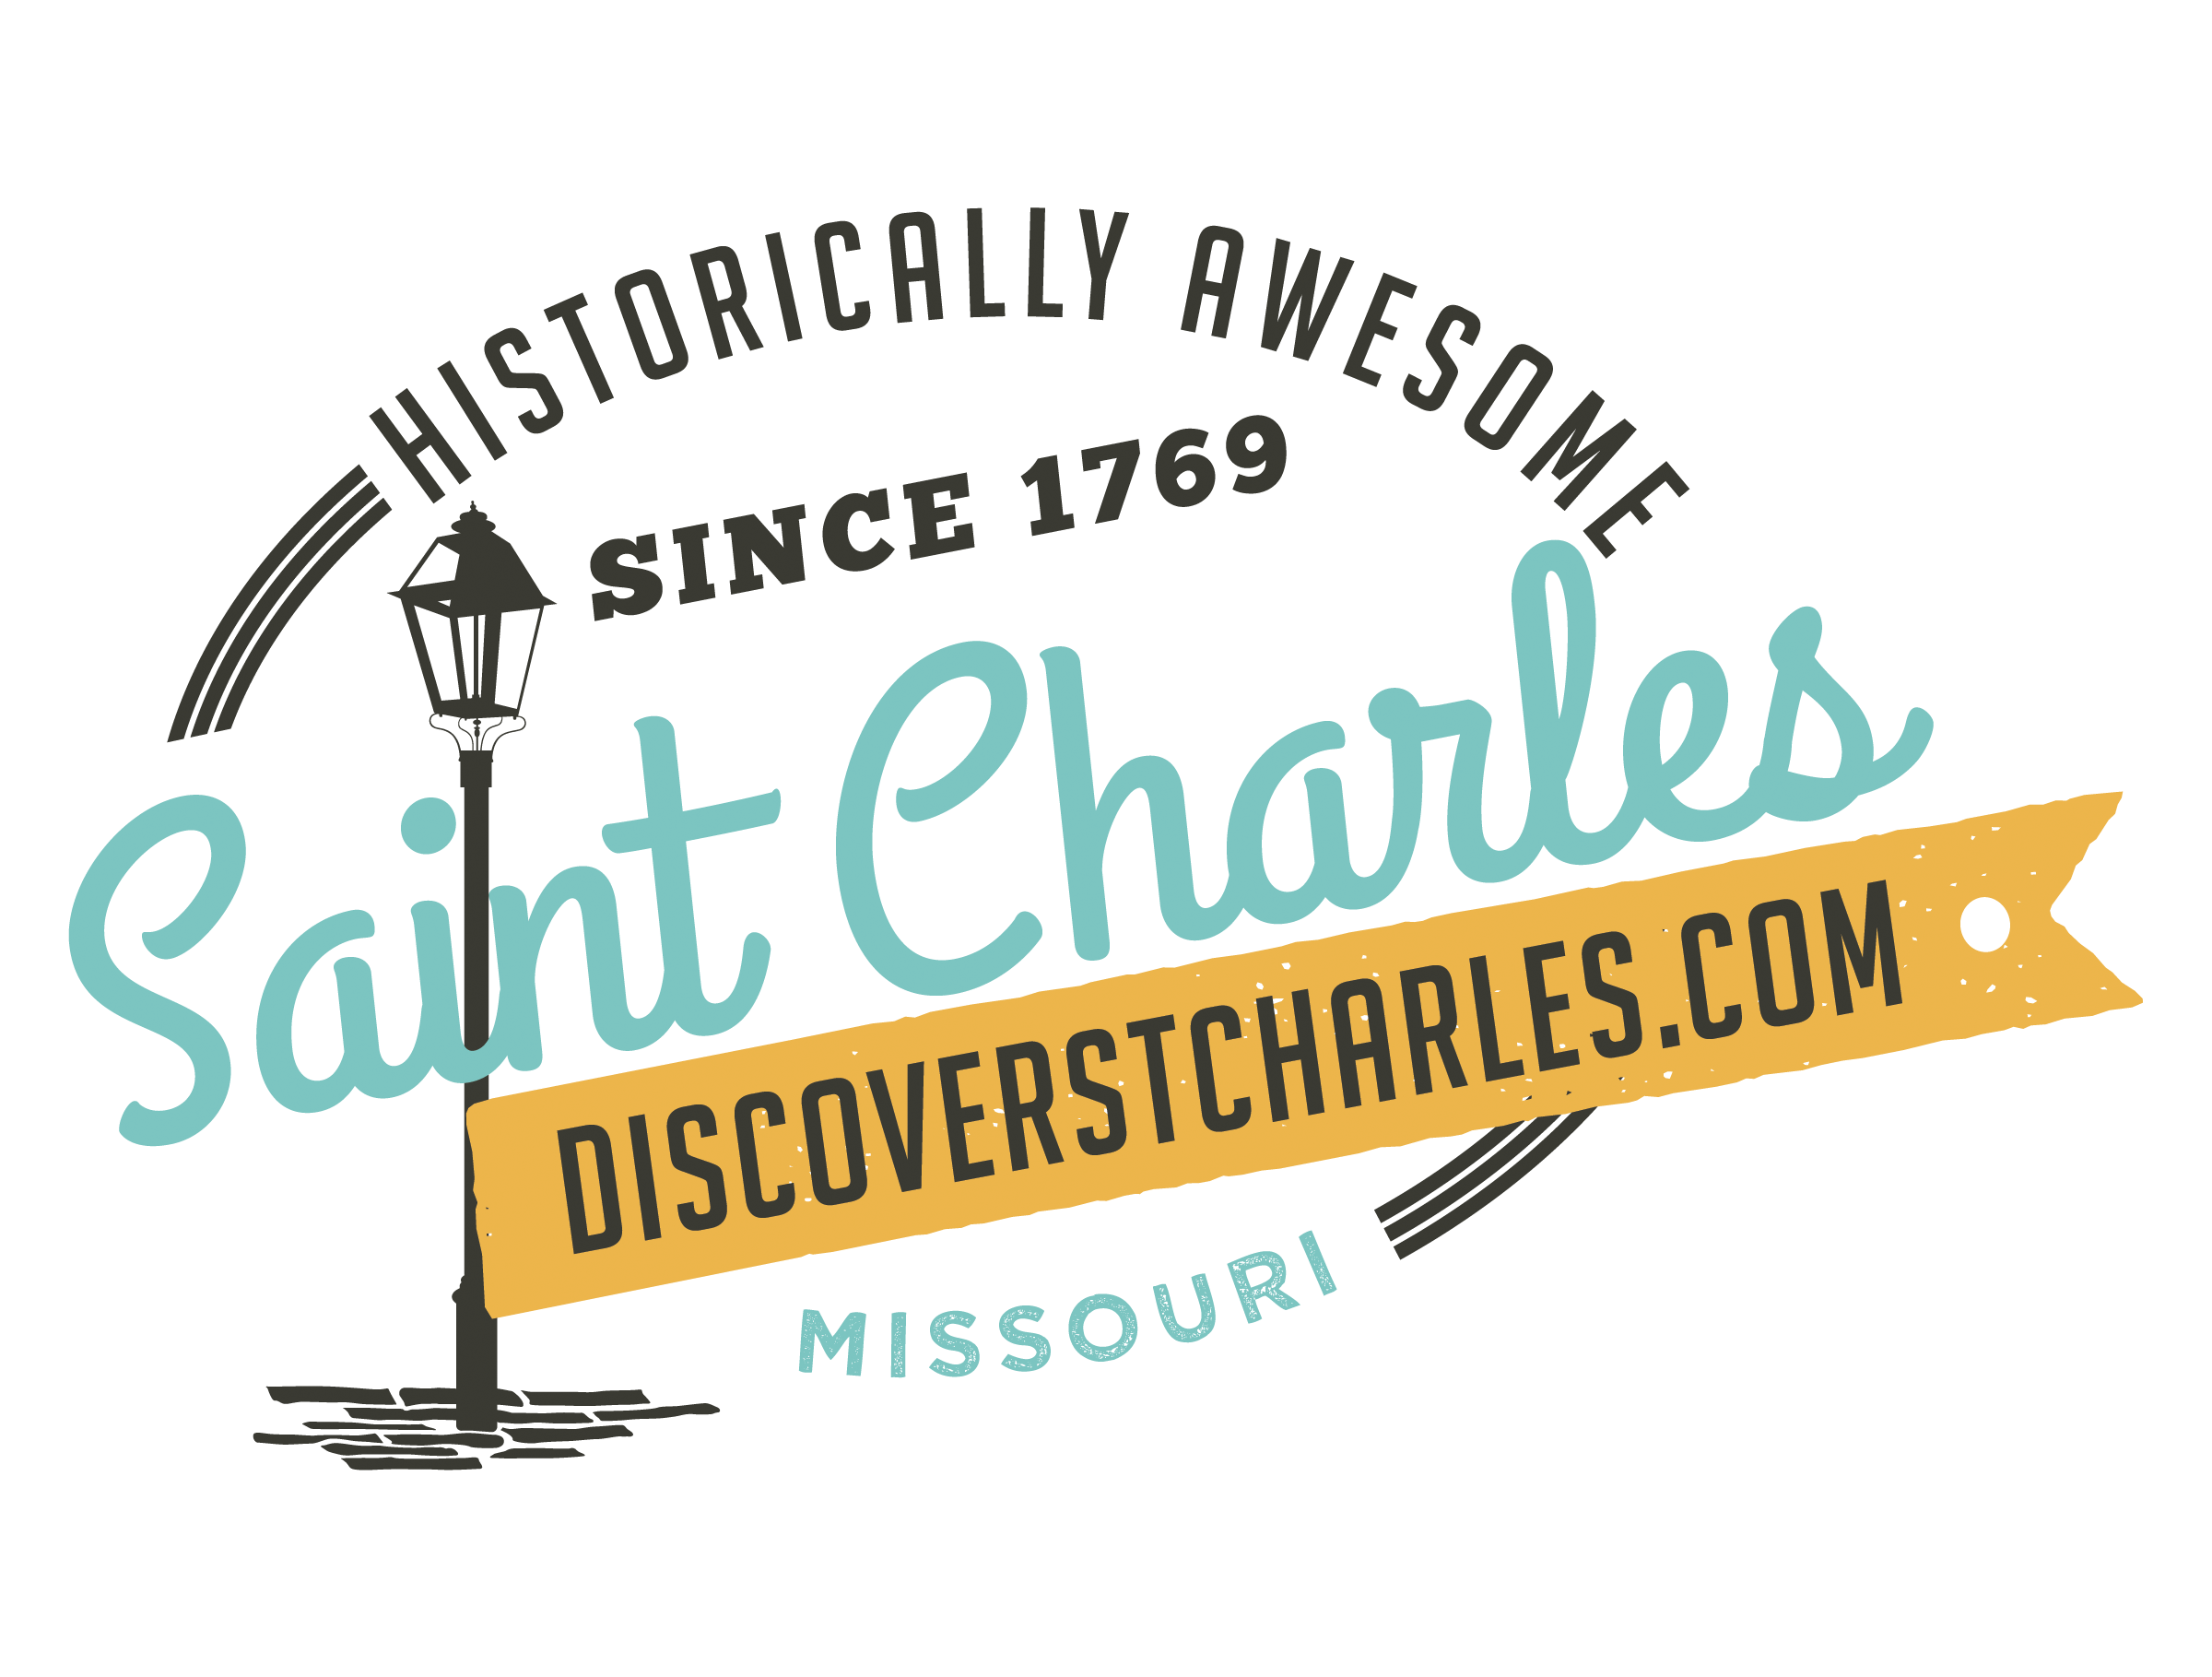 Discover Saint Charles Web Version teal yellow